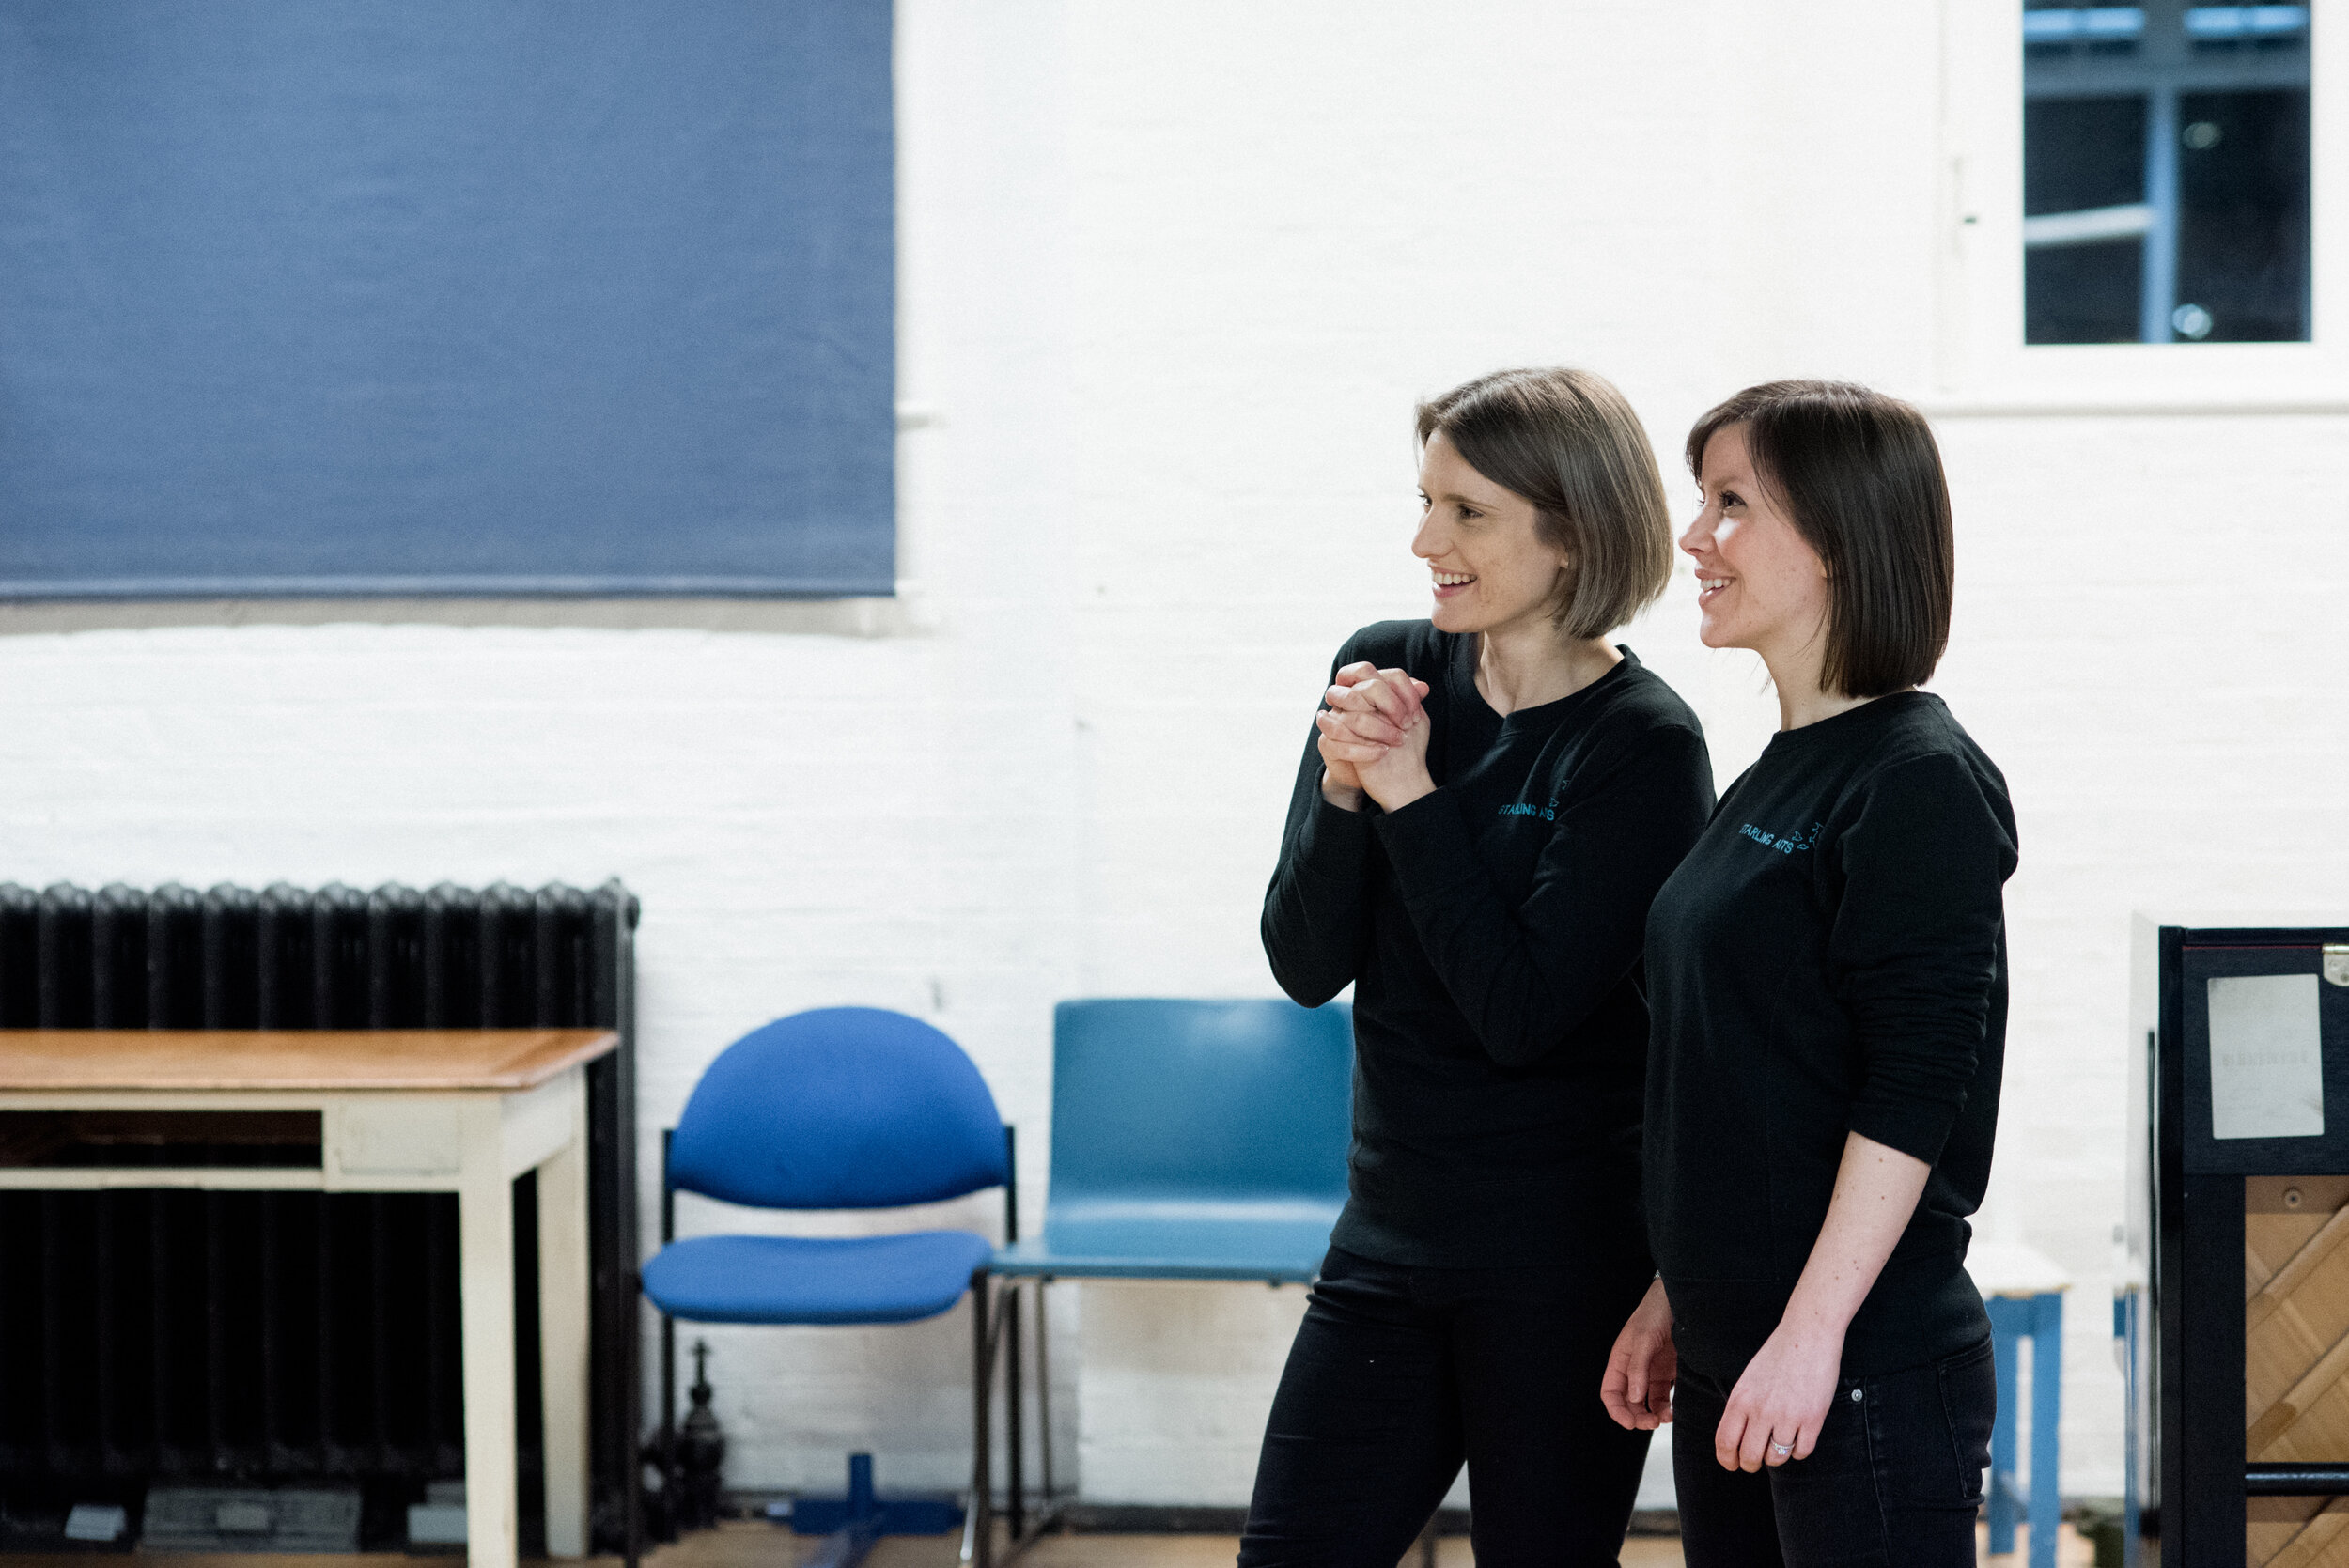 Anna Shields and Emily Garsin specialise in group singing for wellbeing. Photo by Alice the Camera 